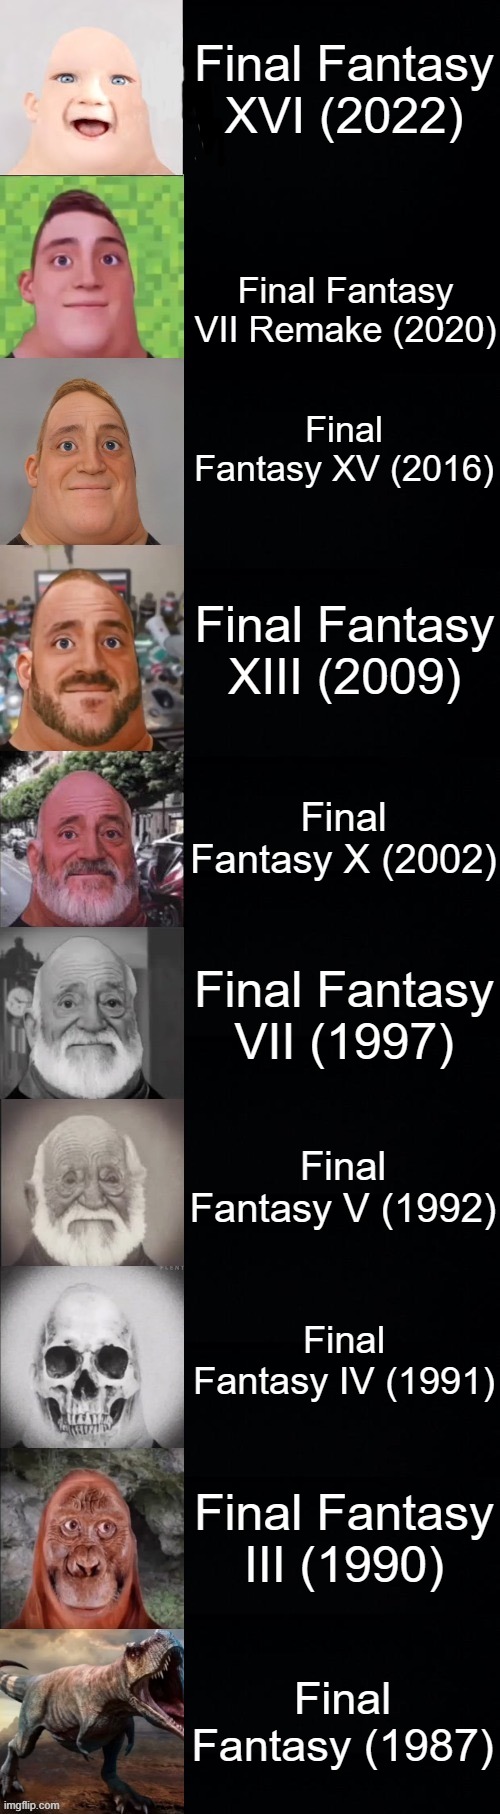 Final Fantasy games by age | Final Fantasy XVI (2022); Final Fantasy VII Remake (2020); Final Fantasy XV (2016); Final Fantasy XIII (2009); Final Fantasy X (2002); Final Fantasy VII (1997); Final Fantasy V (1992); Final Fantasy IV (1991); Final Fantasy III (1990); Final Fantasy (1987) | image tagged in mr incredible becoming old | made w/ Imgflip meme maker